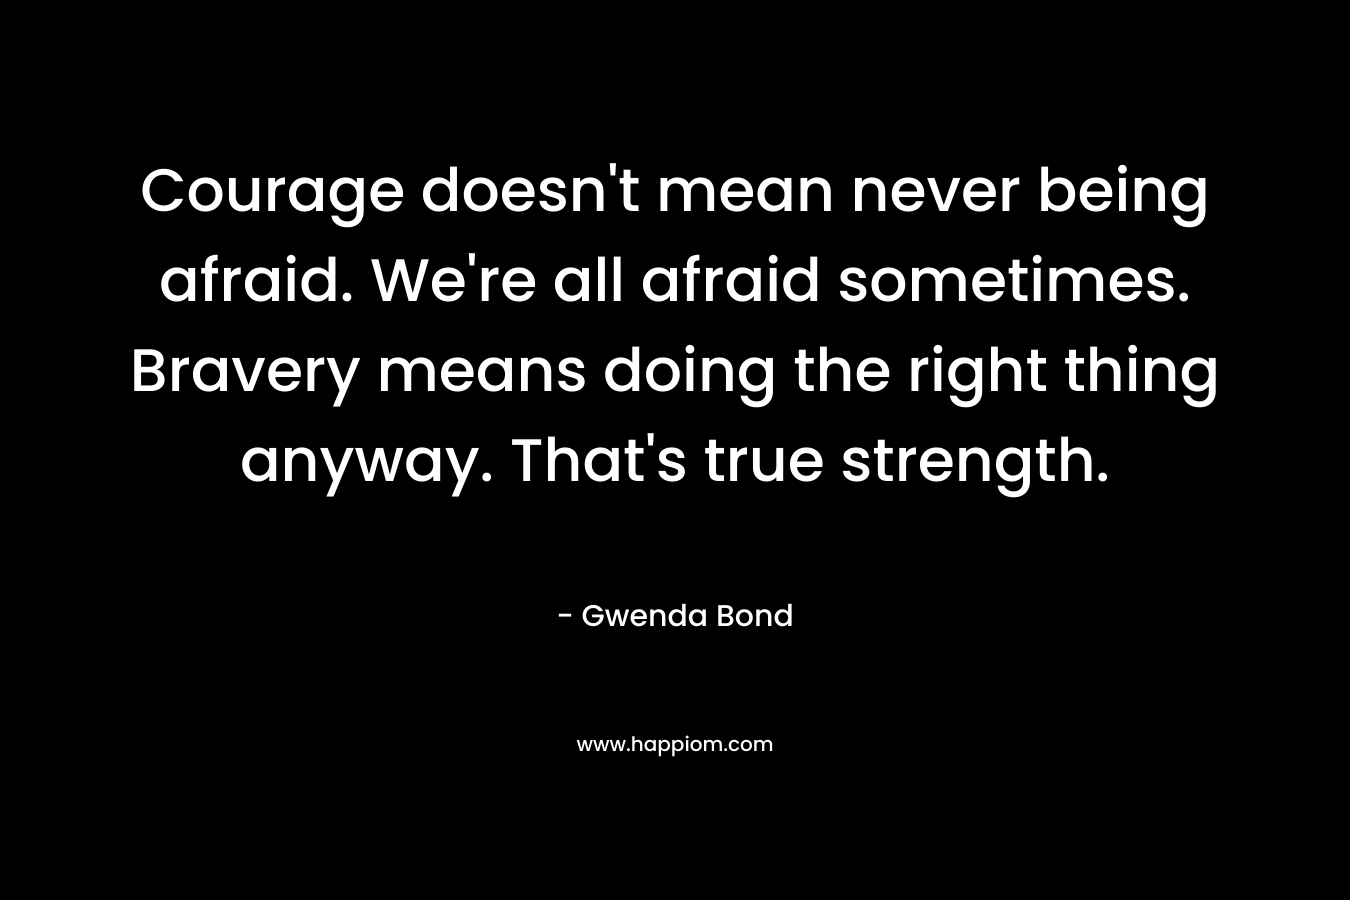 Courage doesn't mean never being afraid. We're all afraid sometimes. Bravery means doing the right thing anyway. That's true strength.